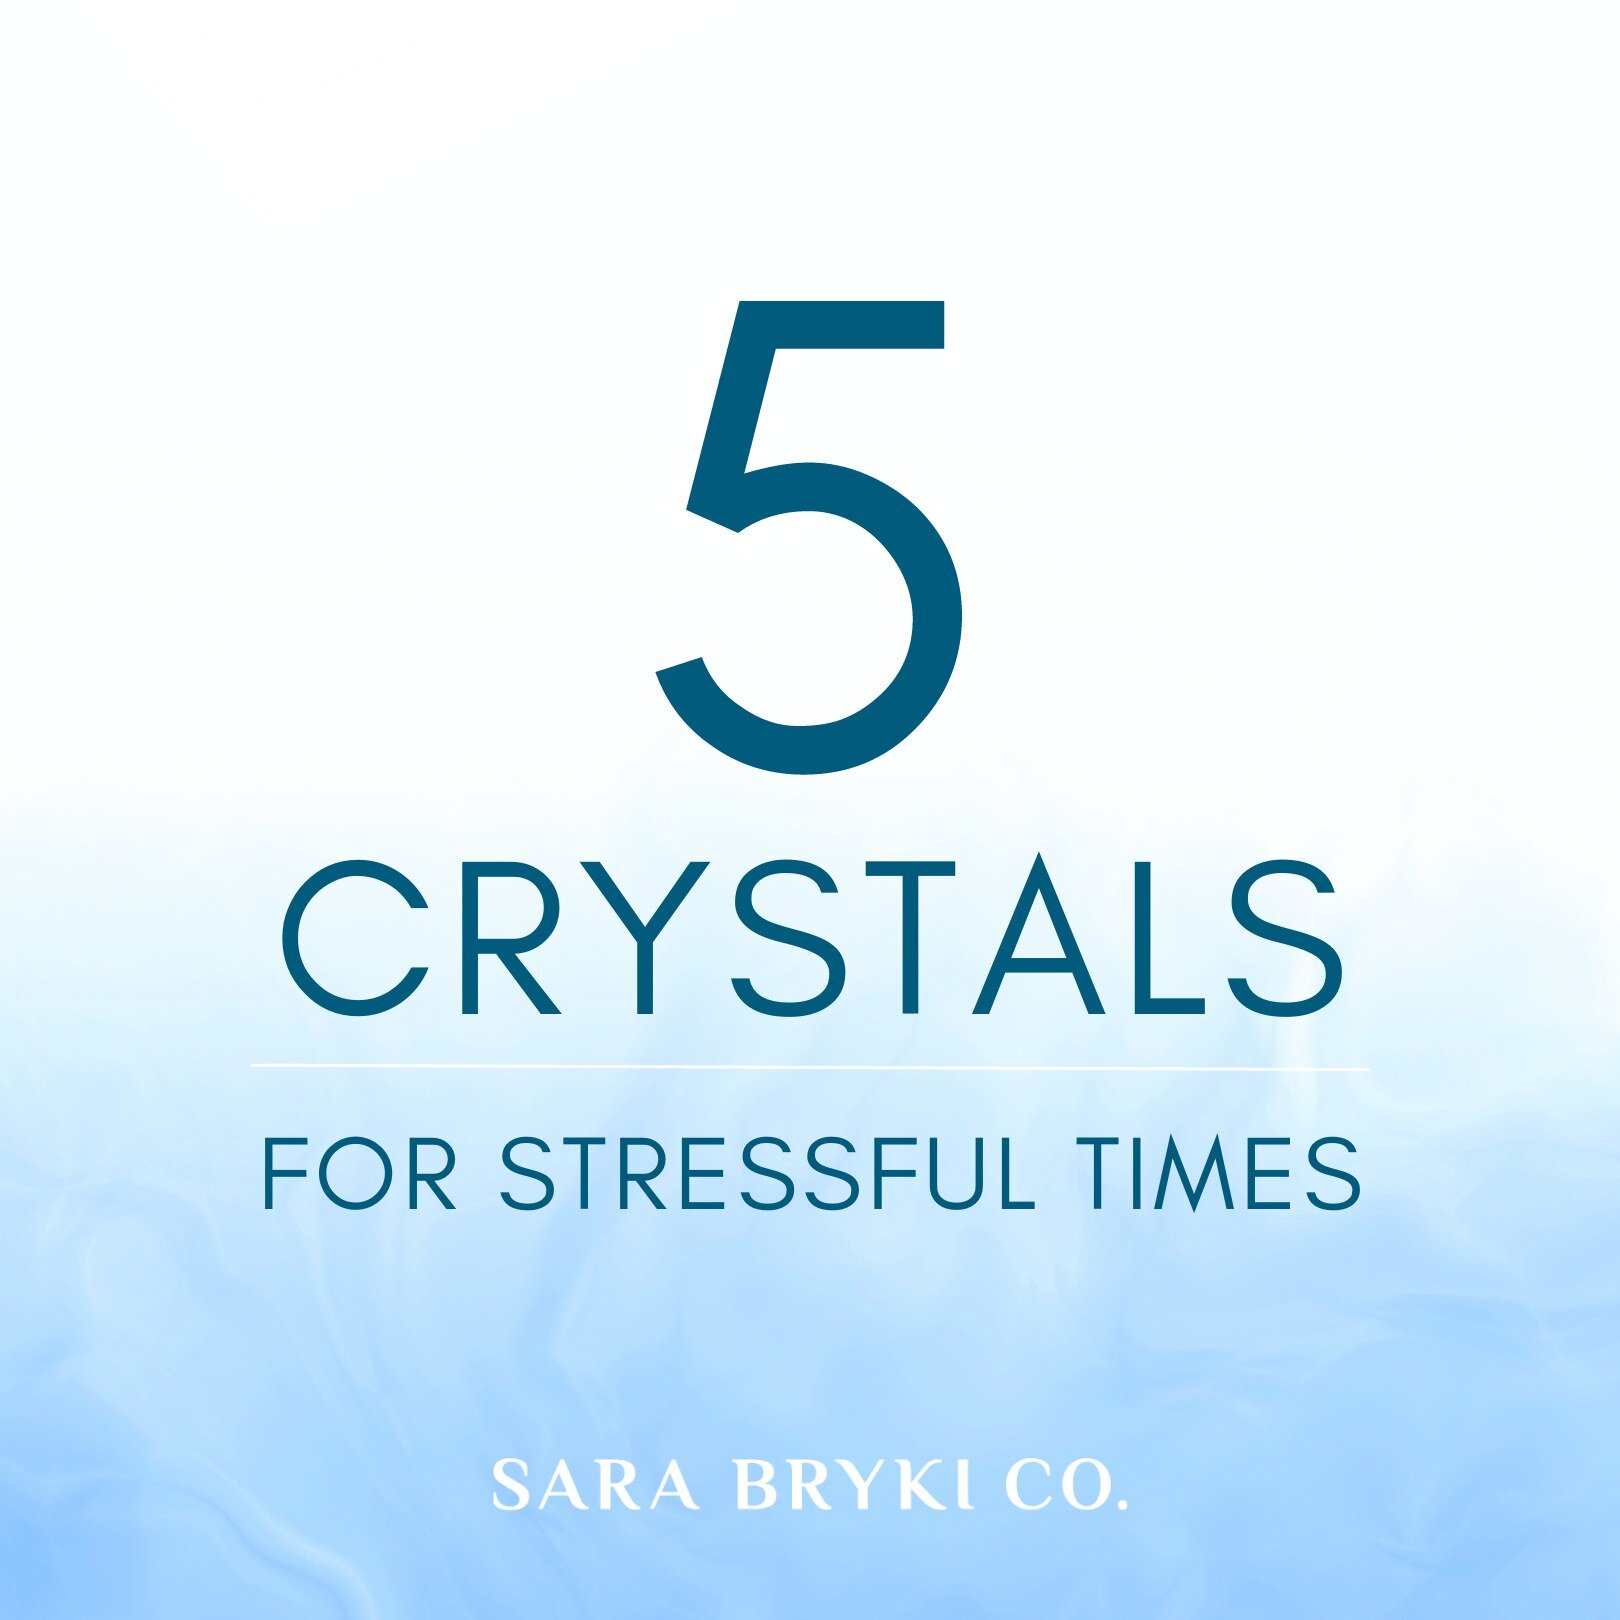 These are the top 5 crystals that I reach for when times get tough and I need some help keeping myself calm, cool, and collected. 🙌 

One of the most frequently asked questions I get is what crystals I recommend to help combat stress and soothe anxi